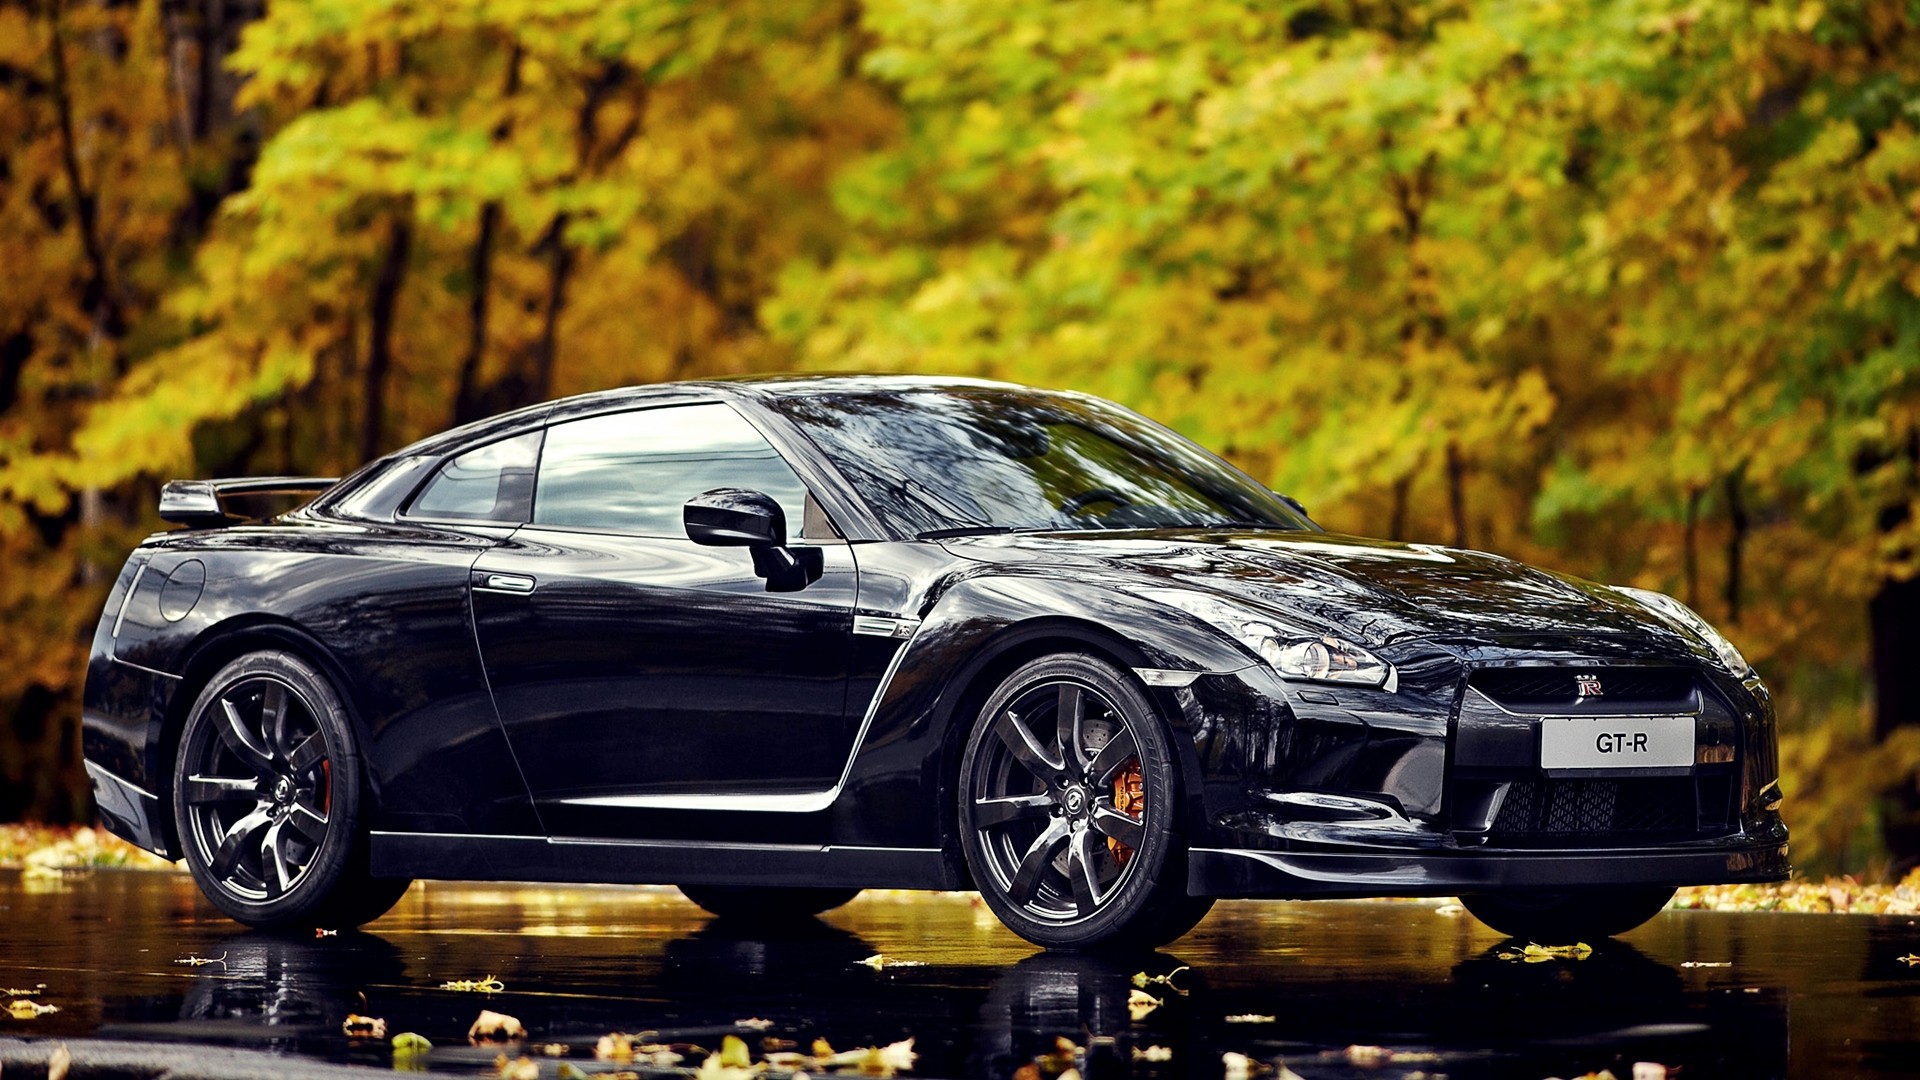 nature, Trees, Cars, Nissan, Nissan, R35, Gt r, Nissan